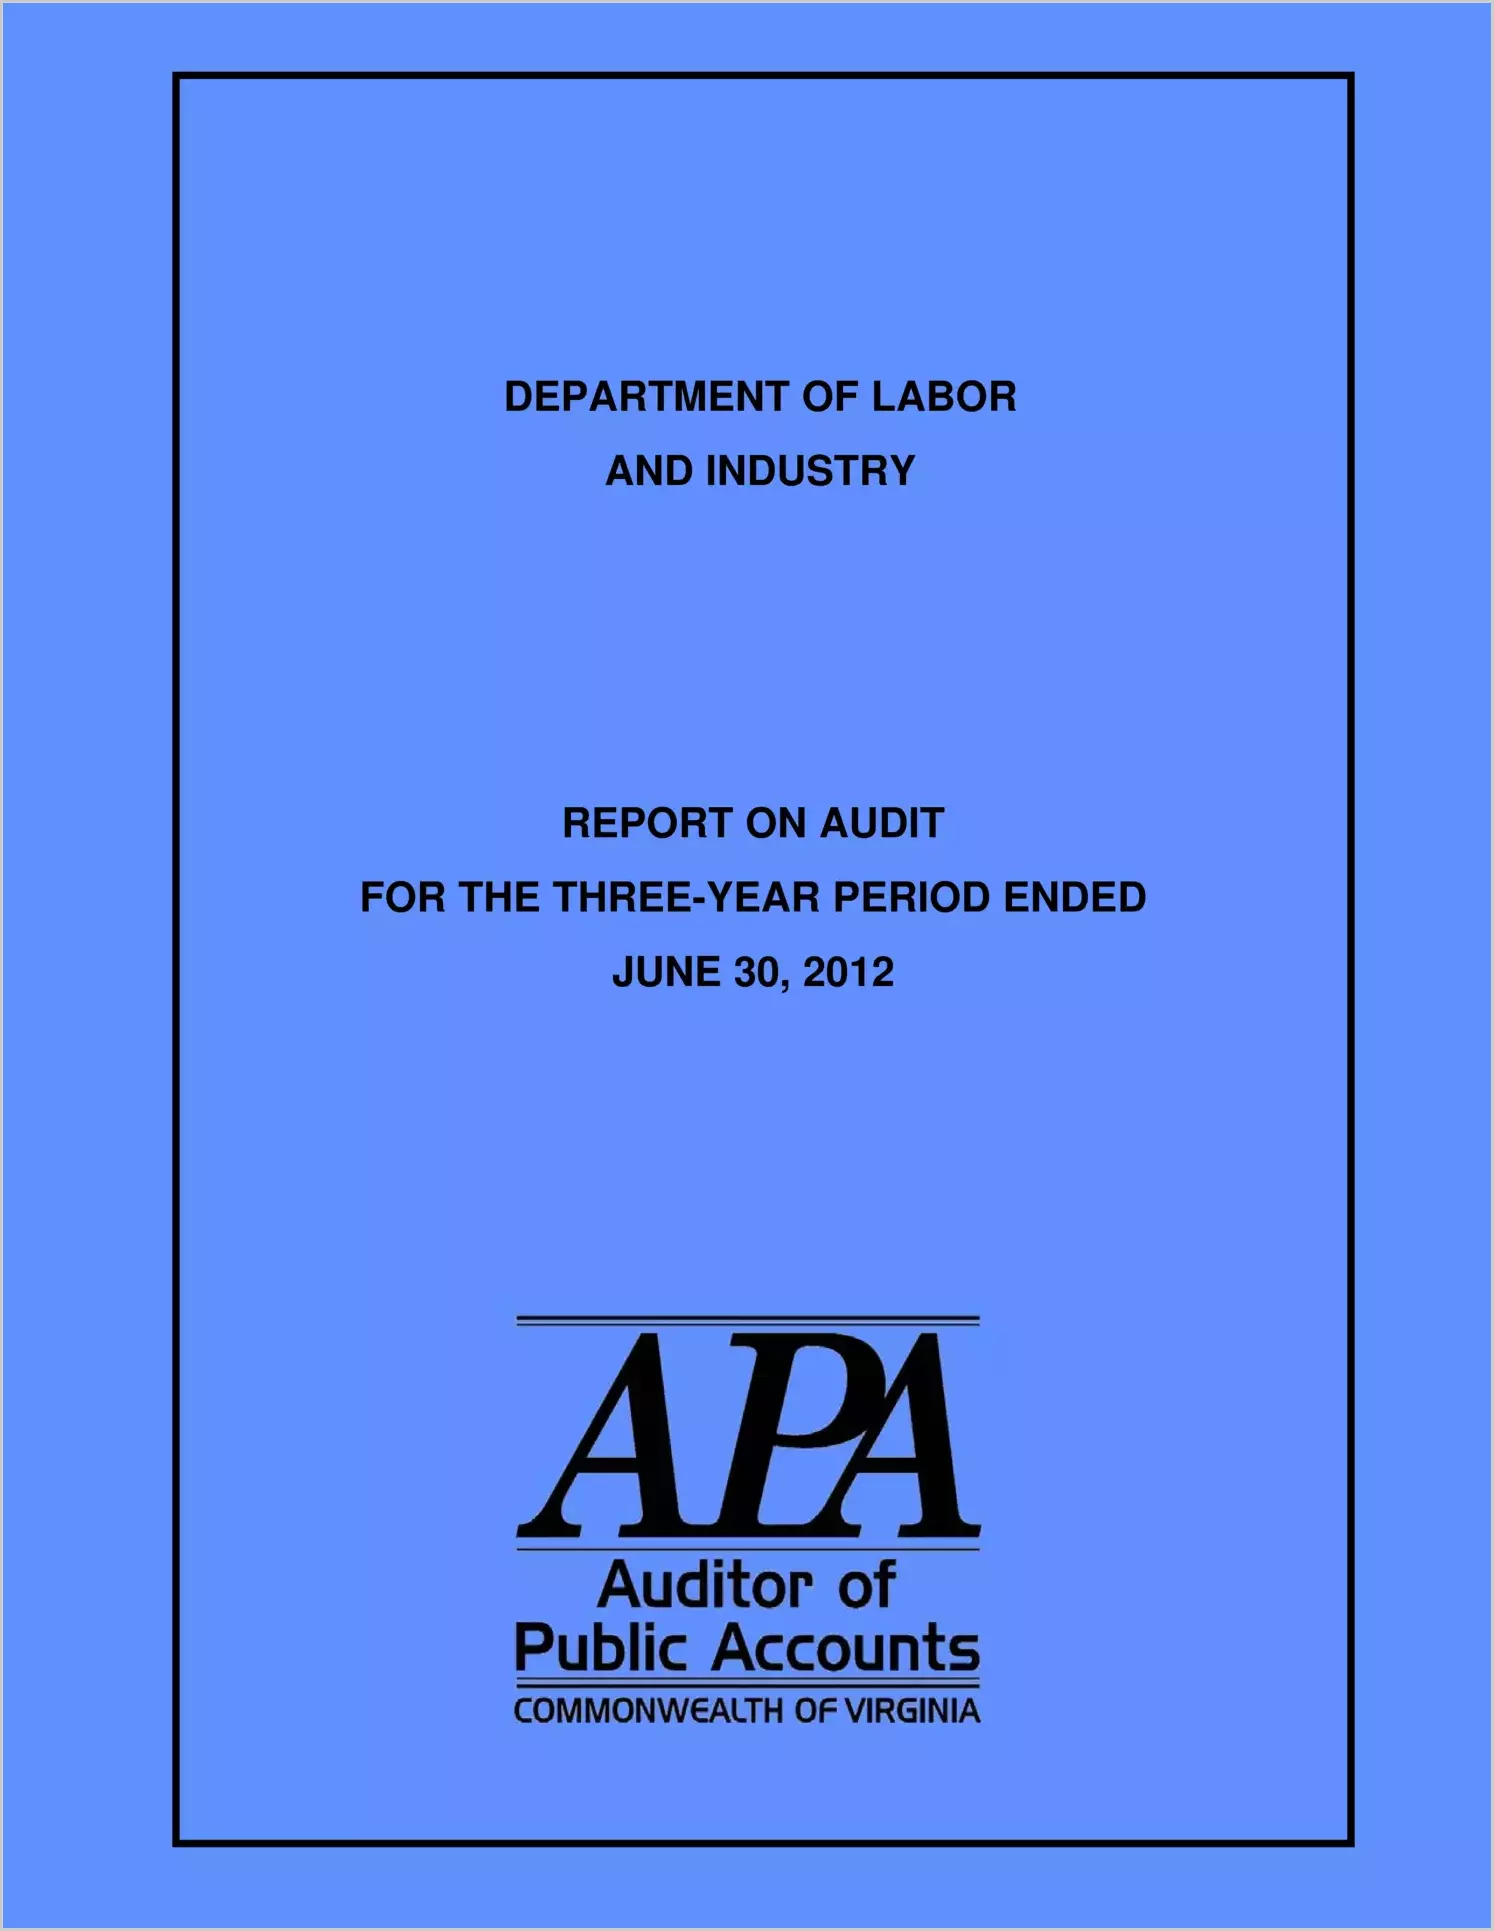 Department of Labor and Industry Report on Audit for the three-year period ended June 30, 2012